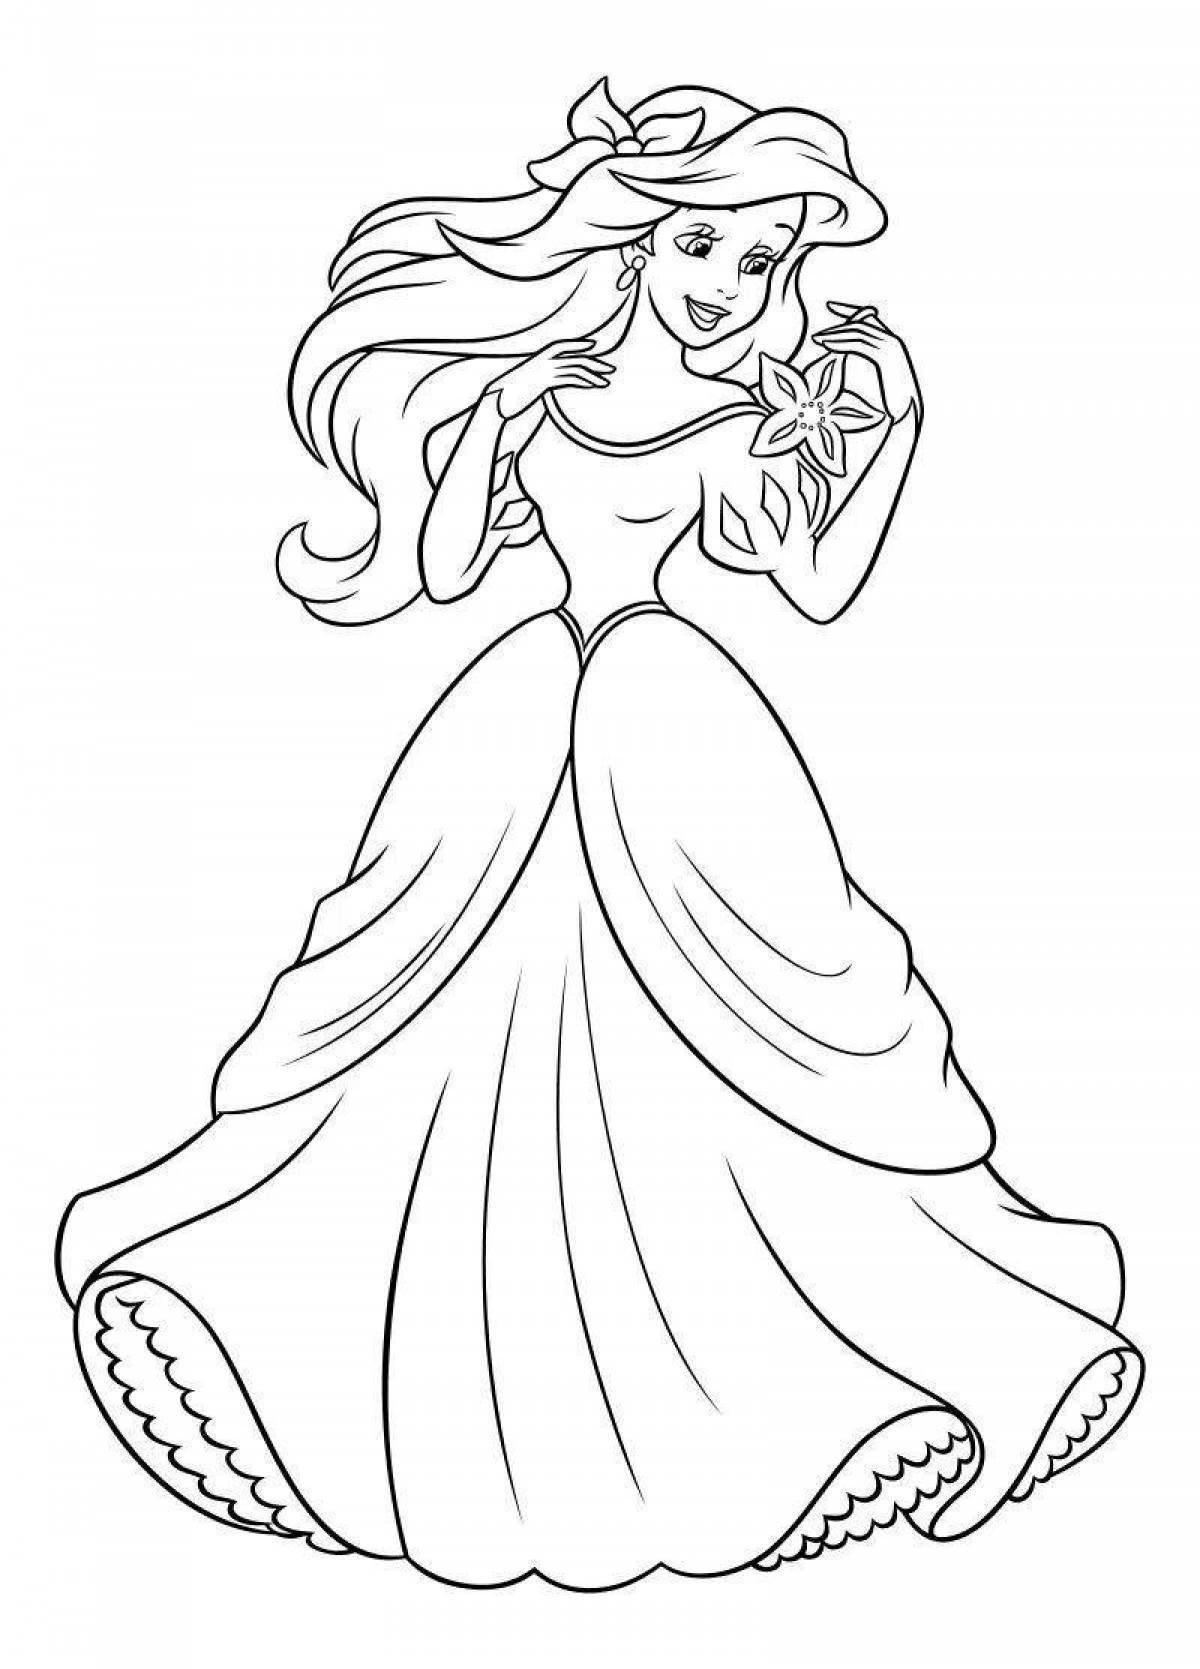 Adorable coloring book for girls ariel